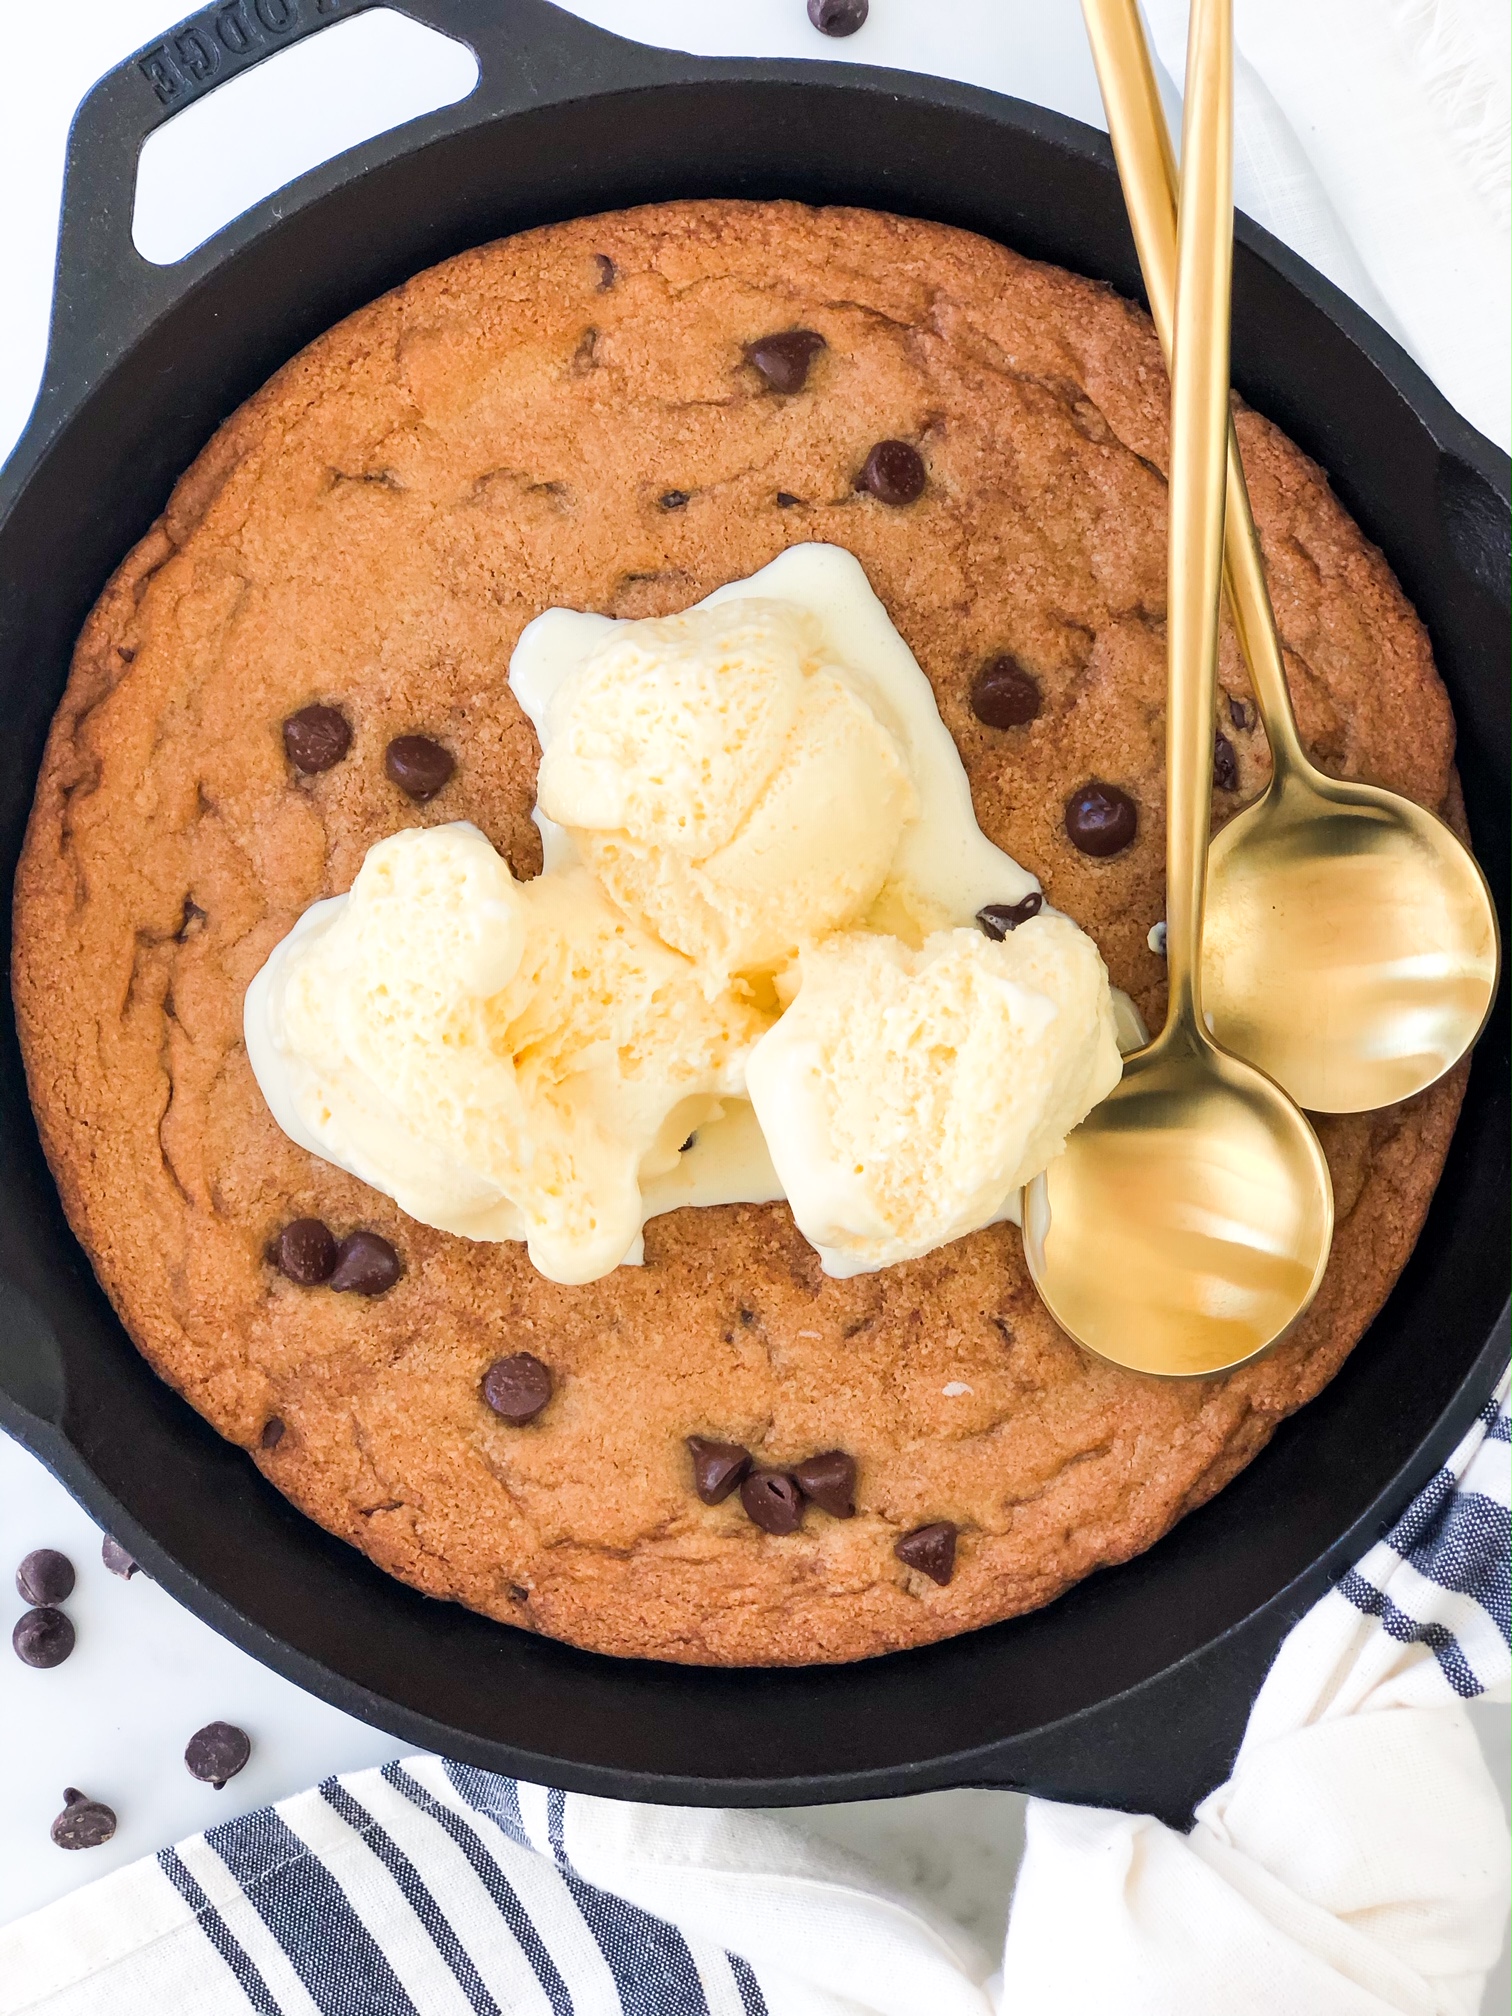 https://fettysfoodblog.com/wp-content/uploads/2020/04/Giant-Chocolate-Chip-Skillet-Cookie-Pizookie.jpg